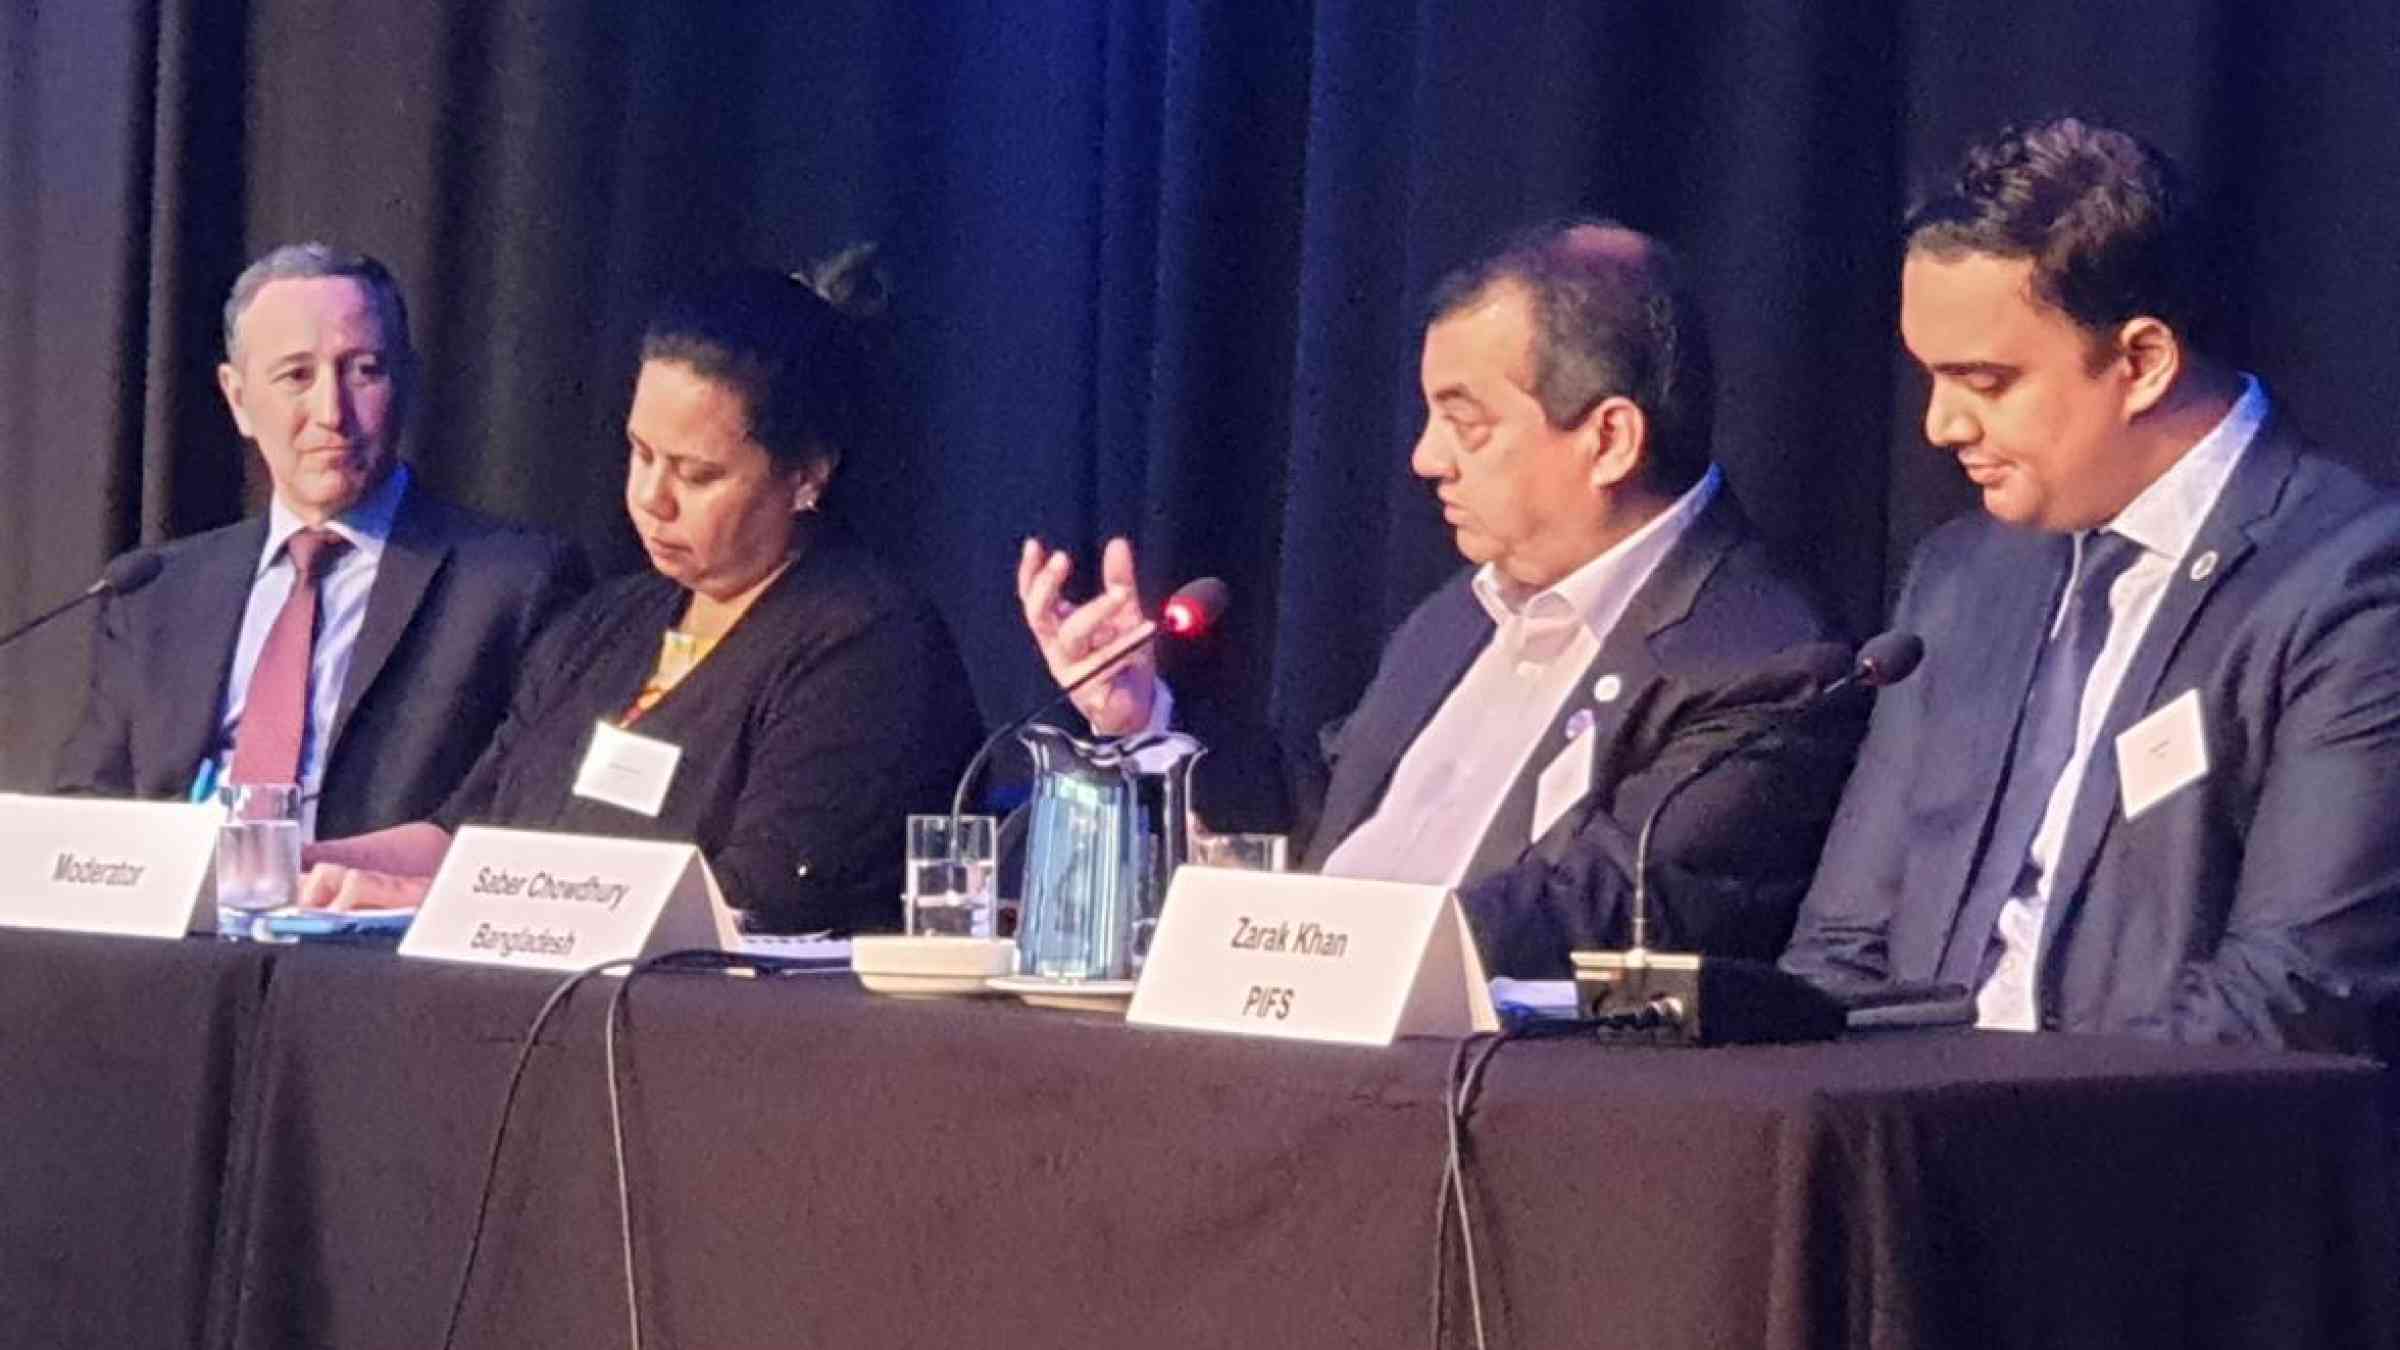 The Hon. Saber Chowdhury, Member of Parliament of Bangladesh, spoke on the need to increase investment in disaster prevention at the Asia-Pacific Partnership Forum for Disaster Risk Reduction, in Brisbane, Australia on 12 November.